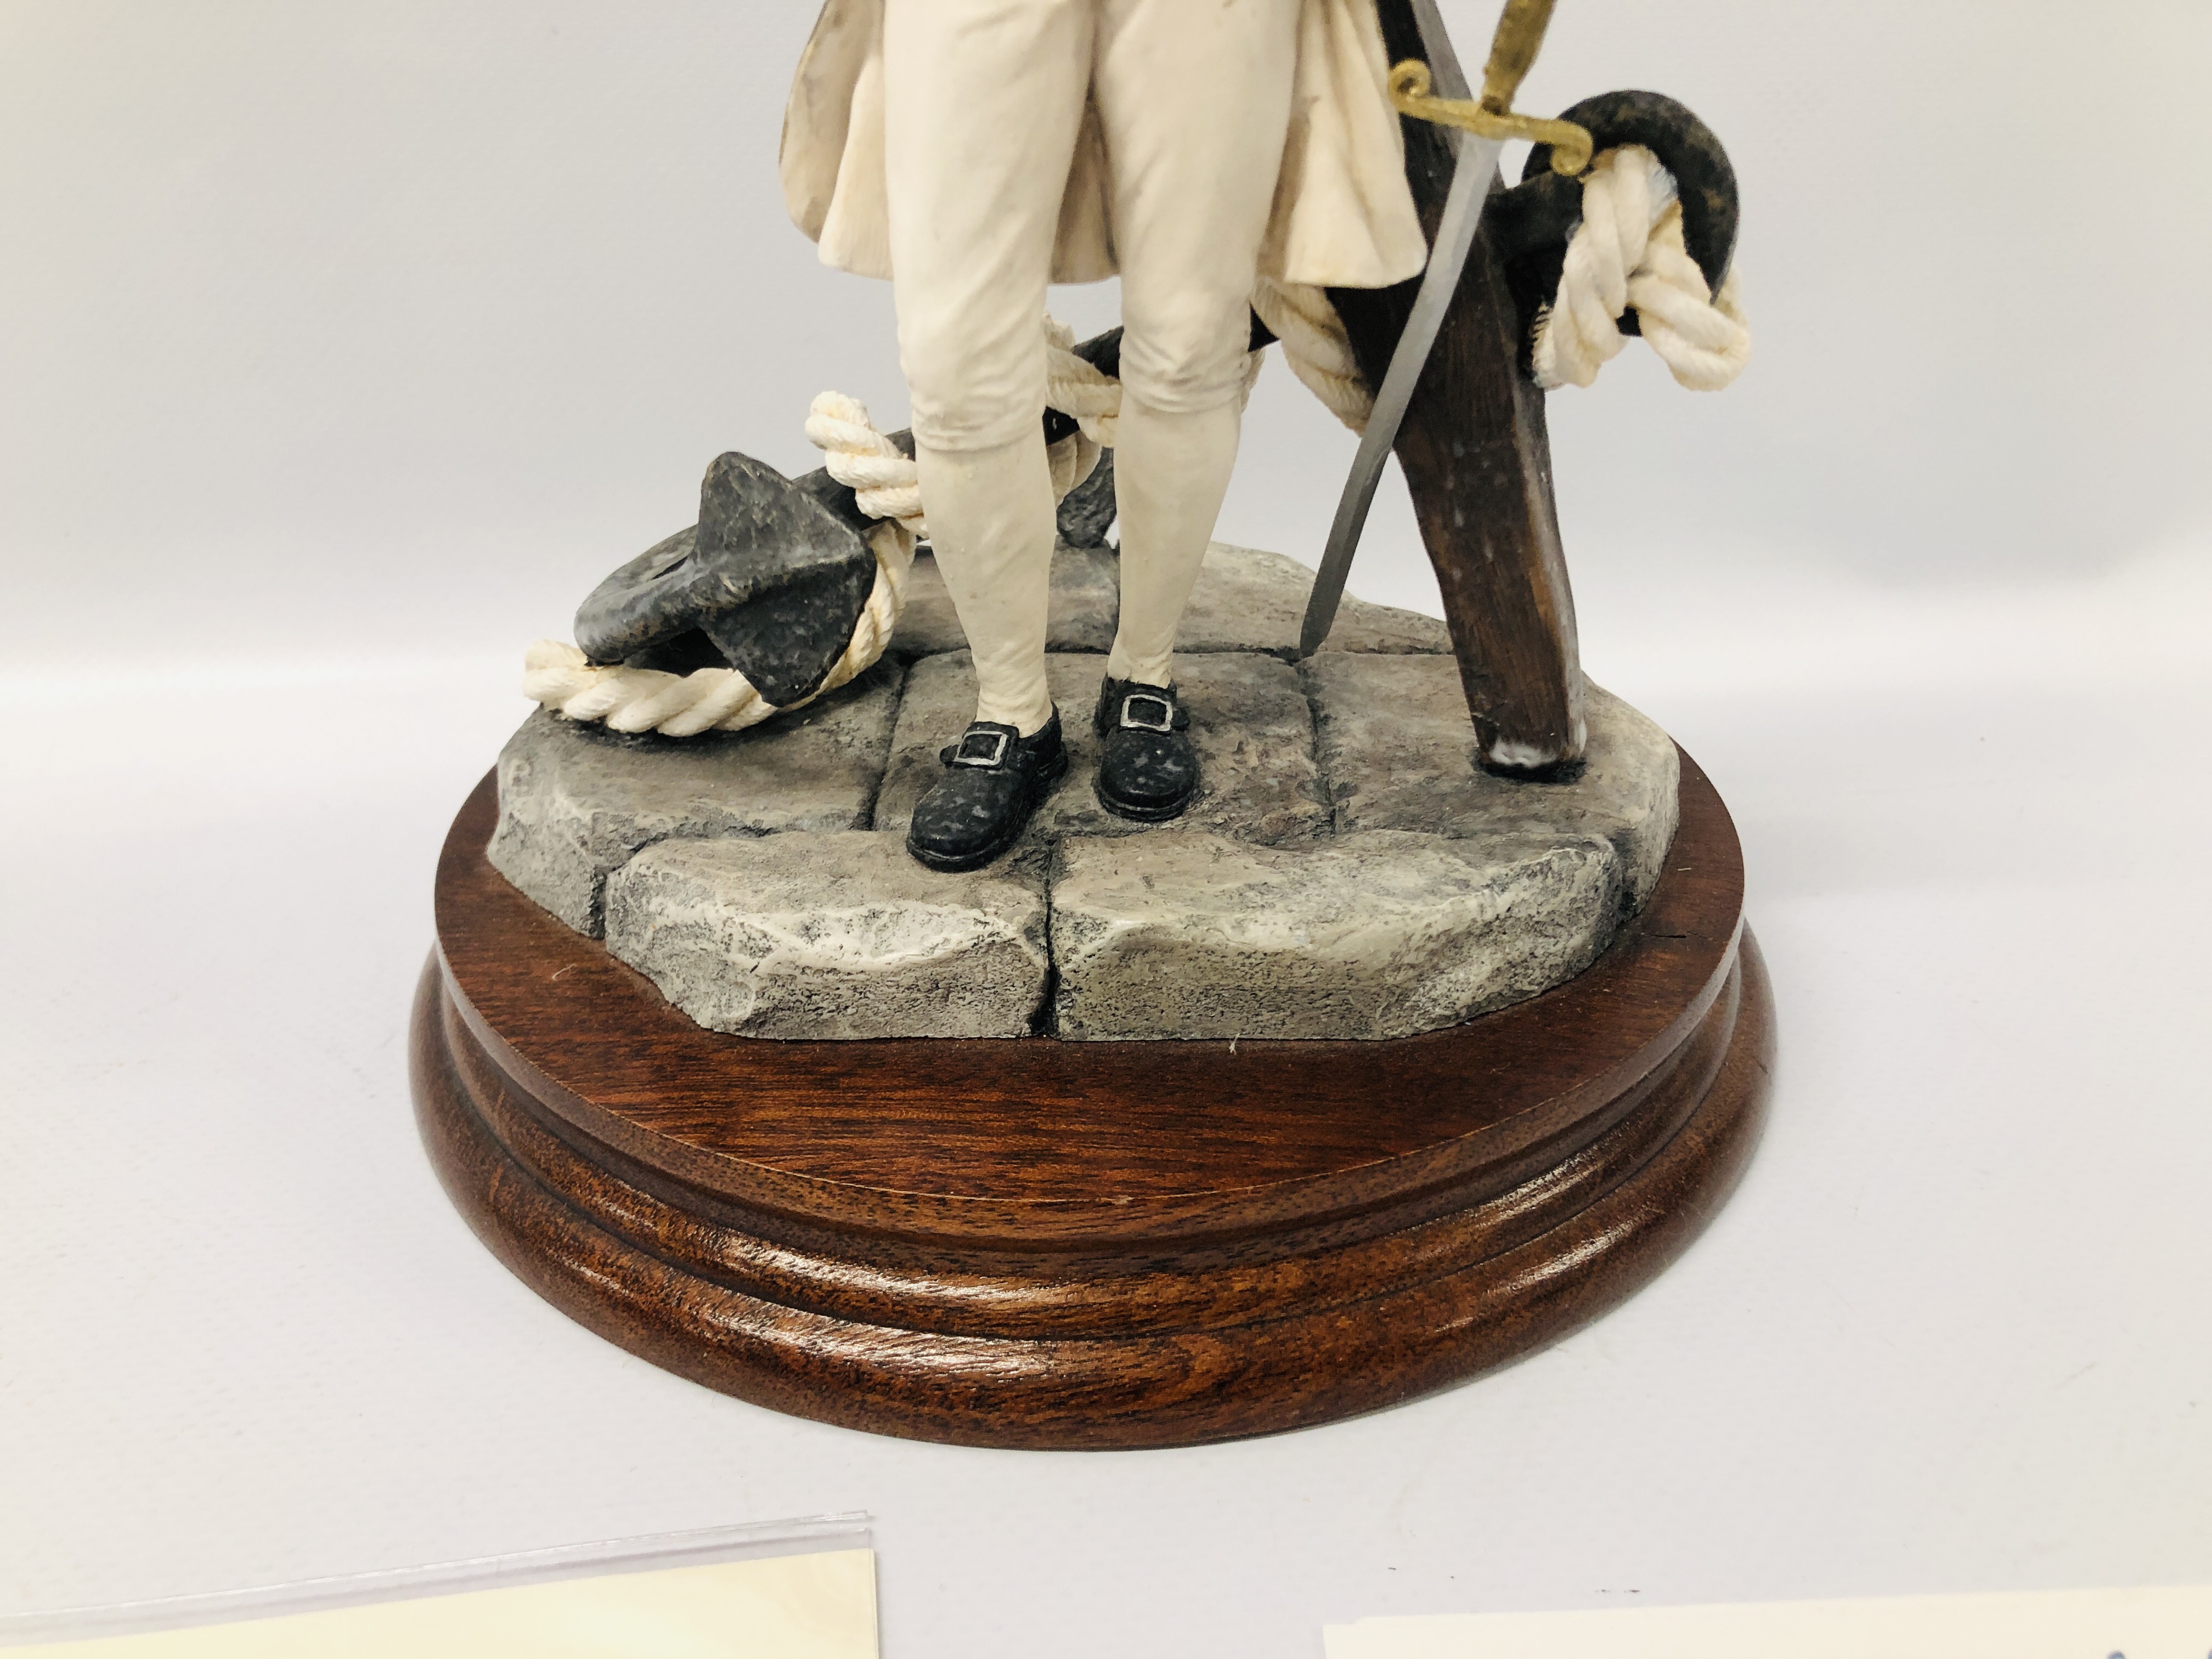 BORDER FINE ARTS LIMITED EDITION SCULPTURE 118 / 500 "ADMIRAL LORD NELSON" ALONG WITH ORIGINAL BOX - Image 4 of 12